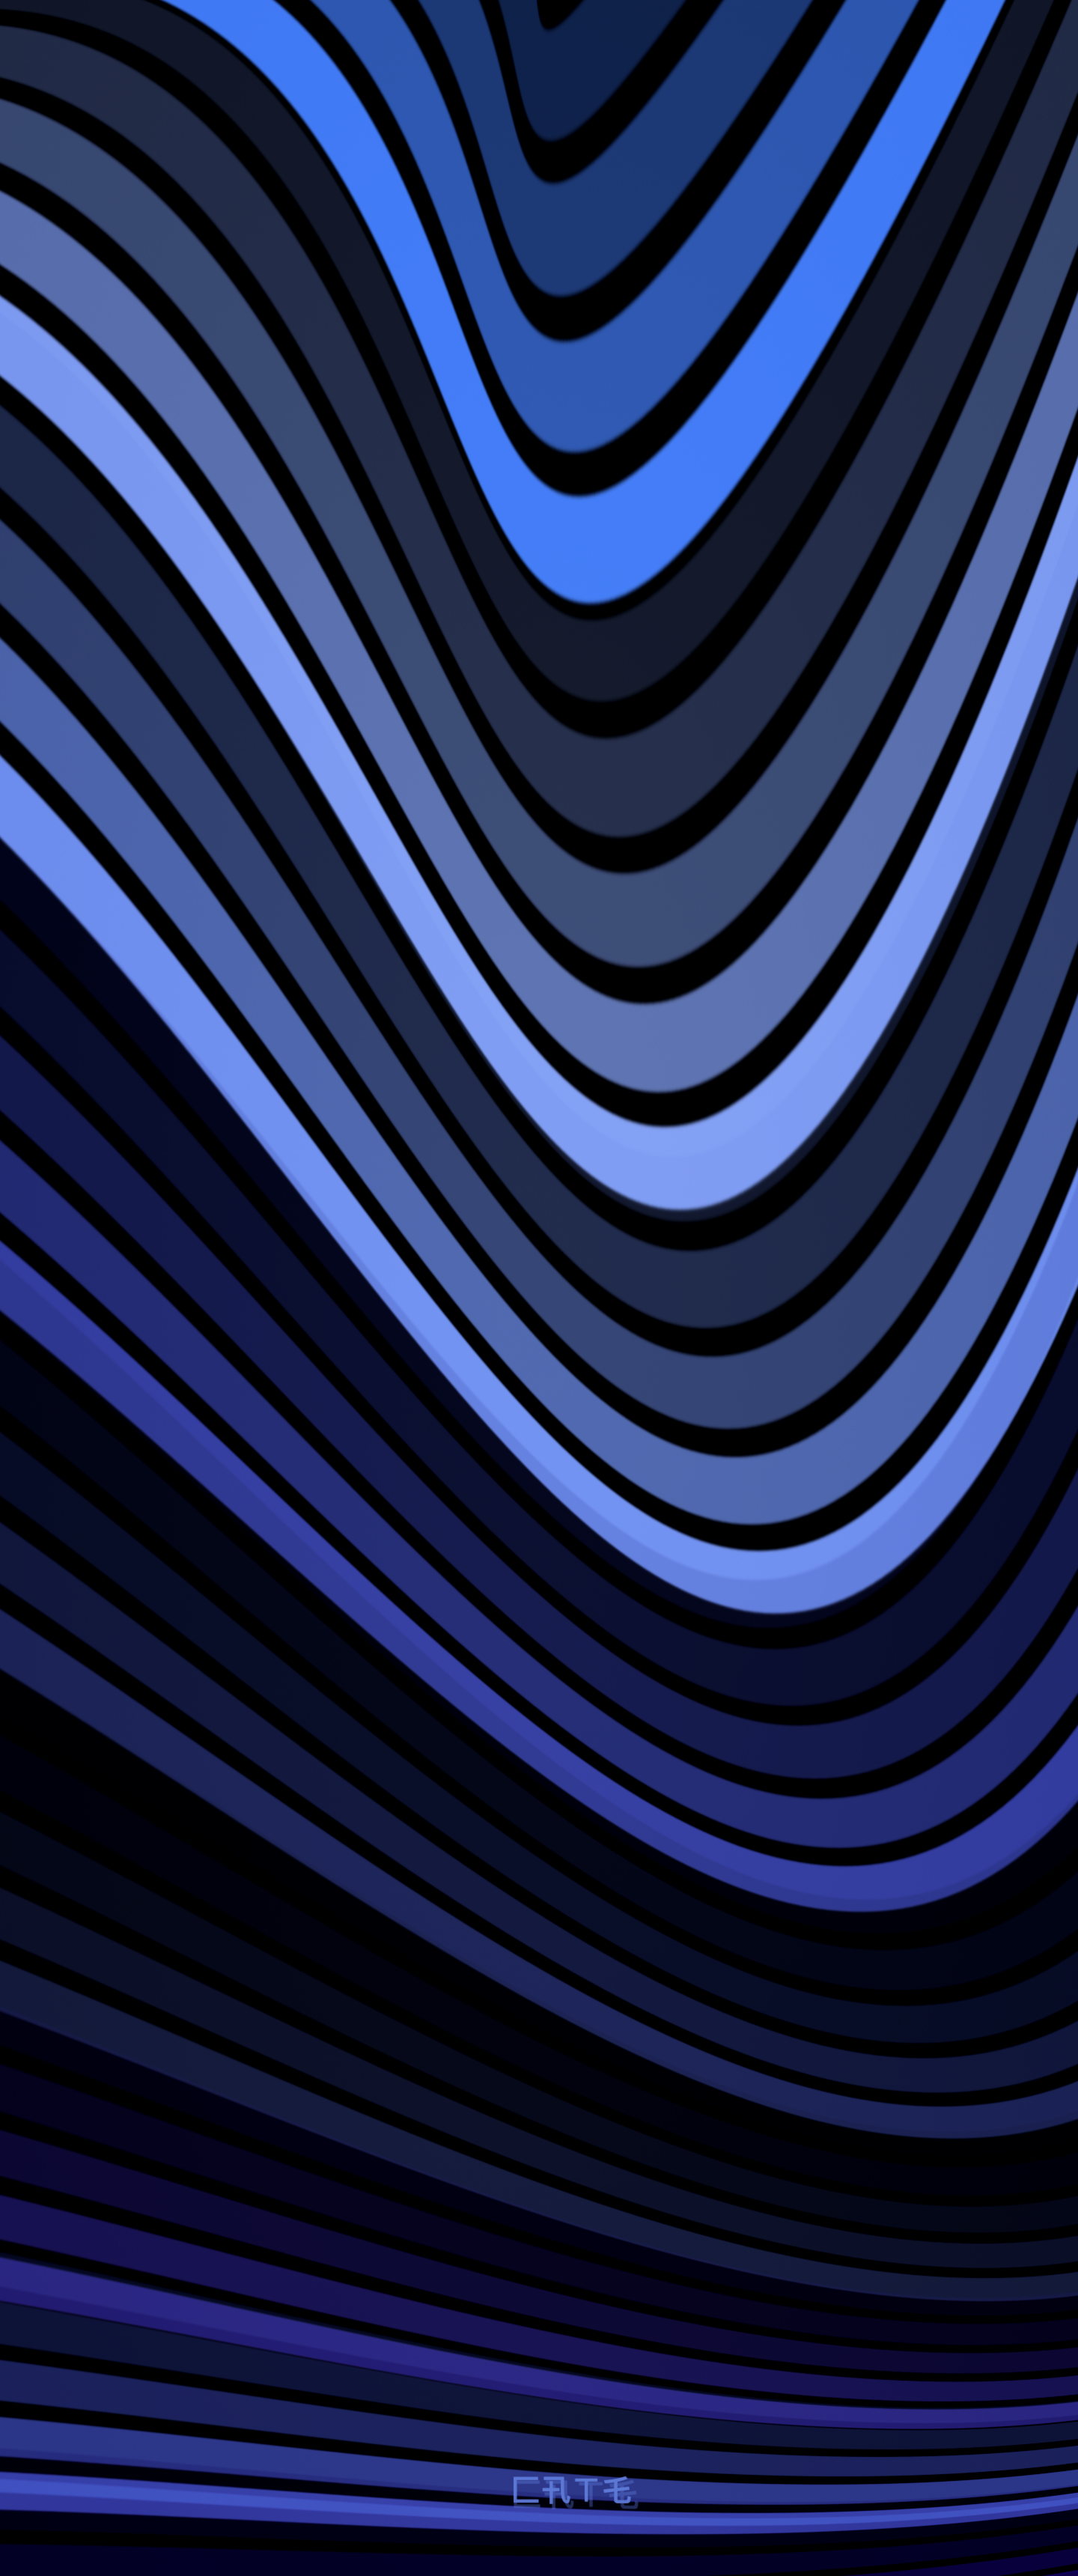 Download these 11 colorful swirls wallpapers for iPhone